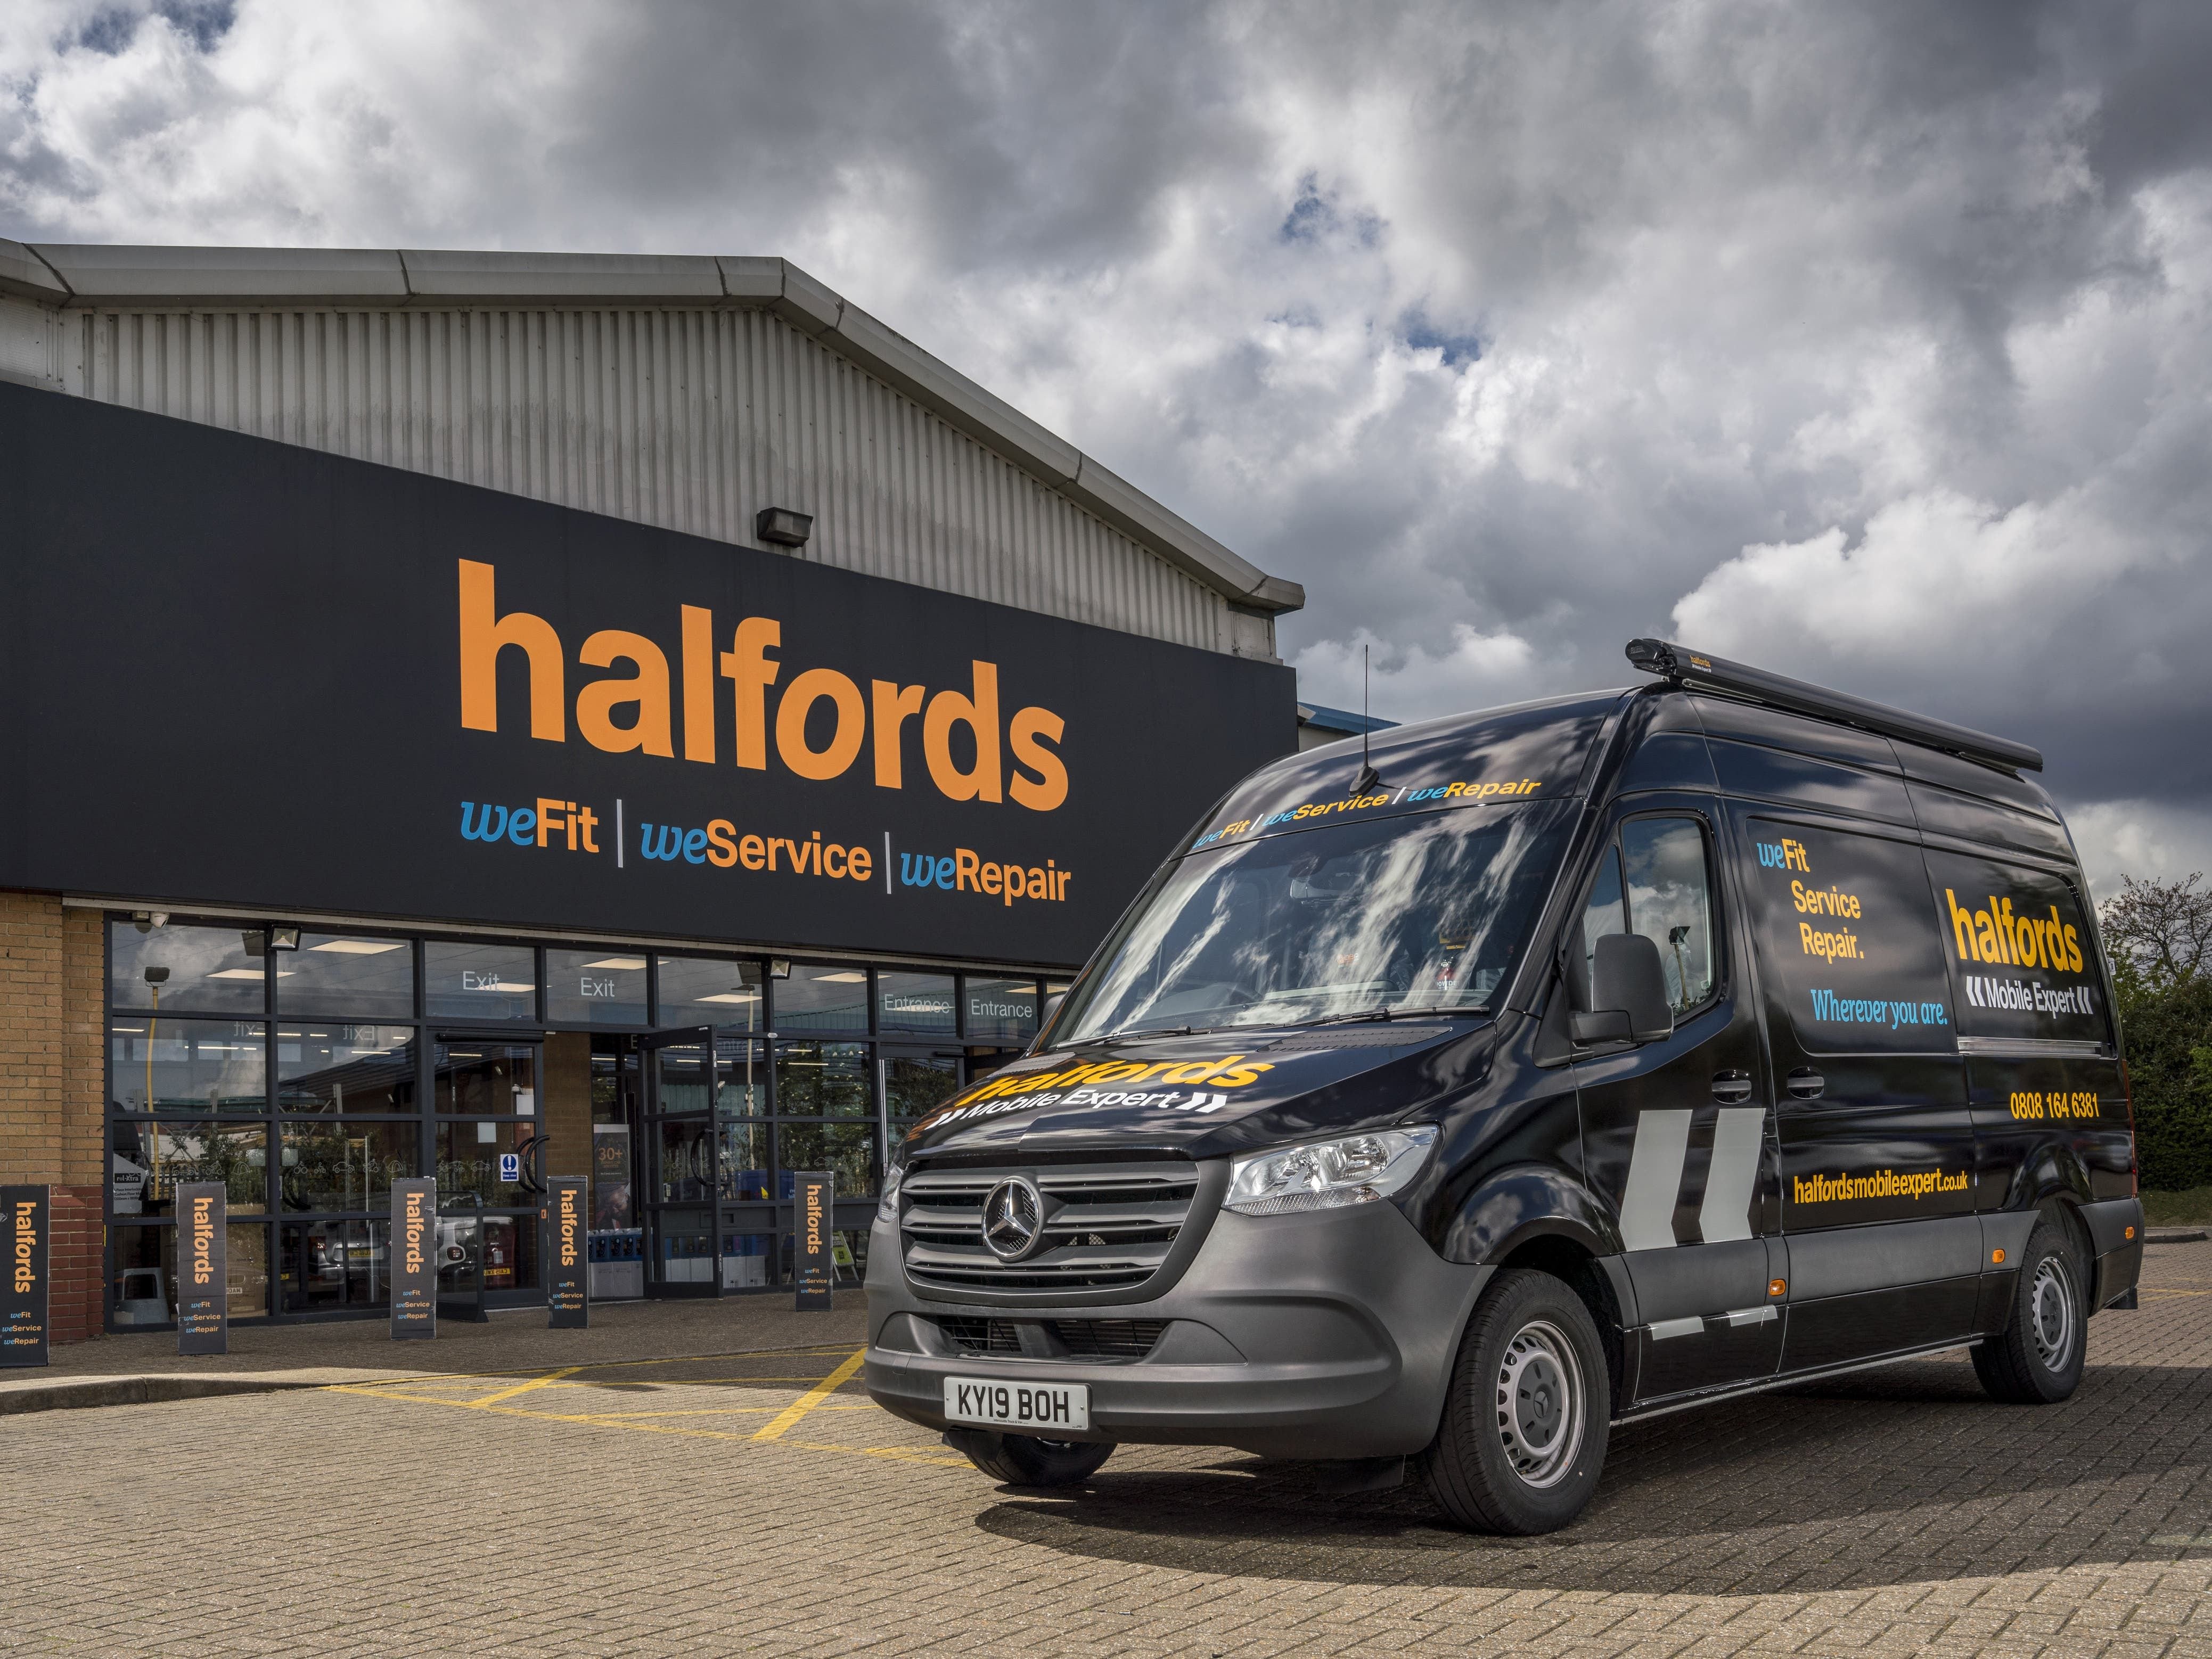 Halfords sees profits tumble and cautions over trading woes